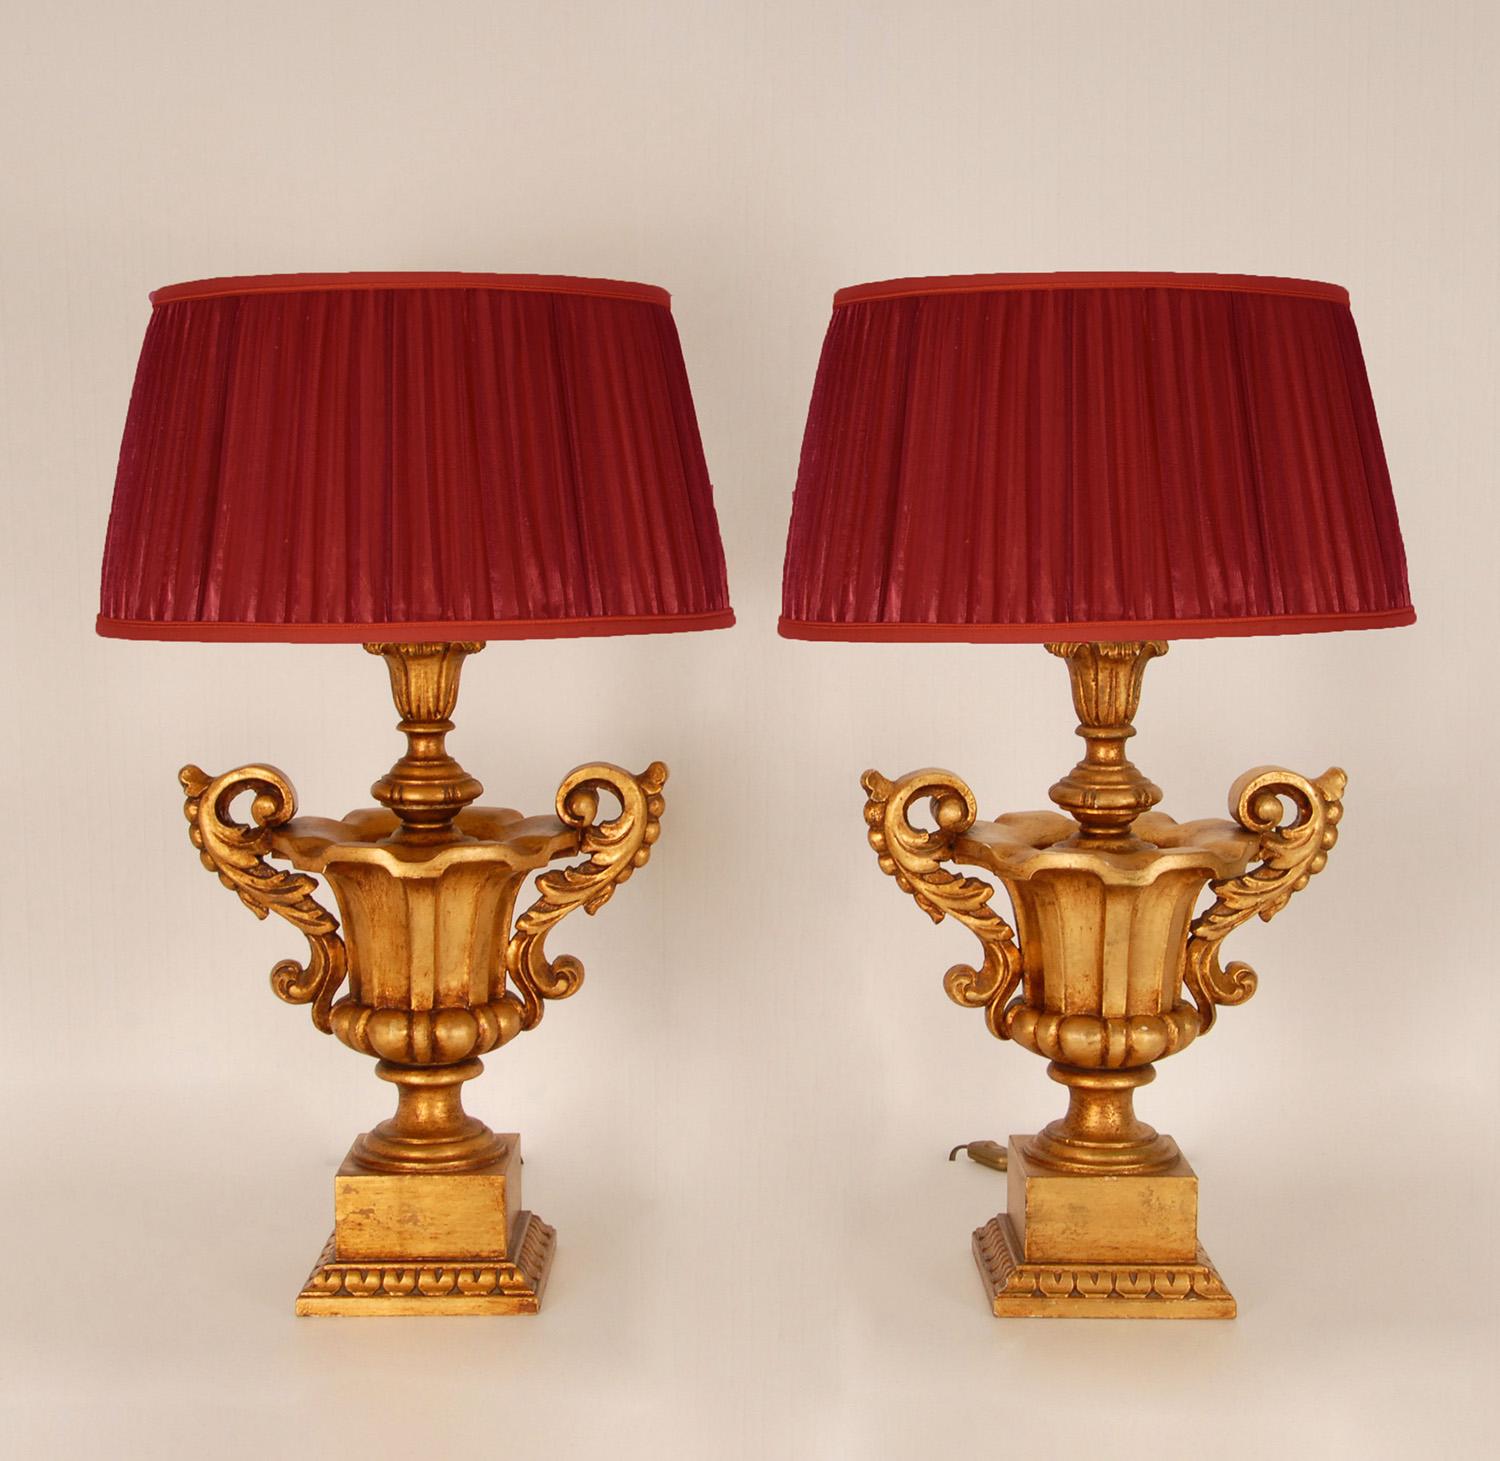 20th Century Vintage Italian Gold Giltwood Lamps Carved Altar Vases Urn Table Lamps a Pair